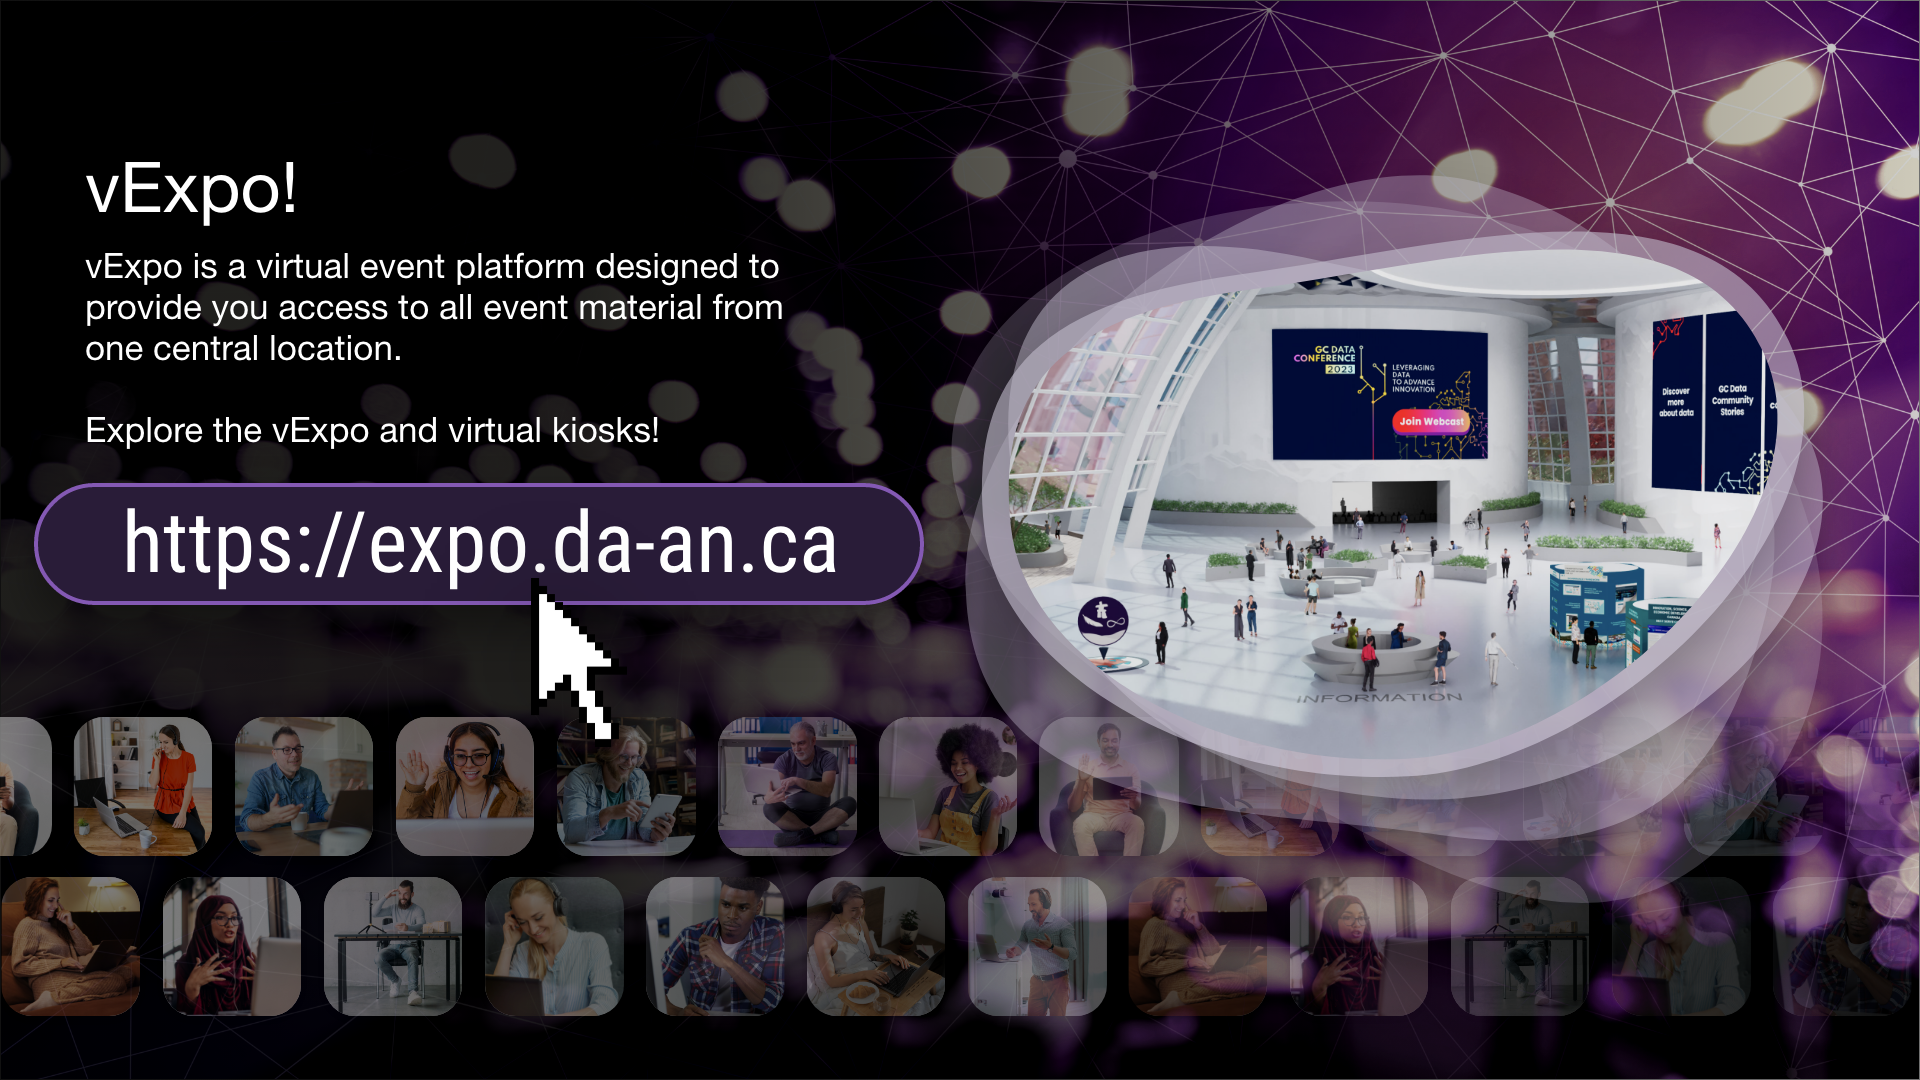 vExpo is a virtual event platform designed to provide you access to all event material from one central location.